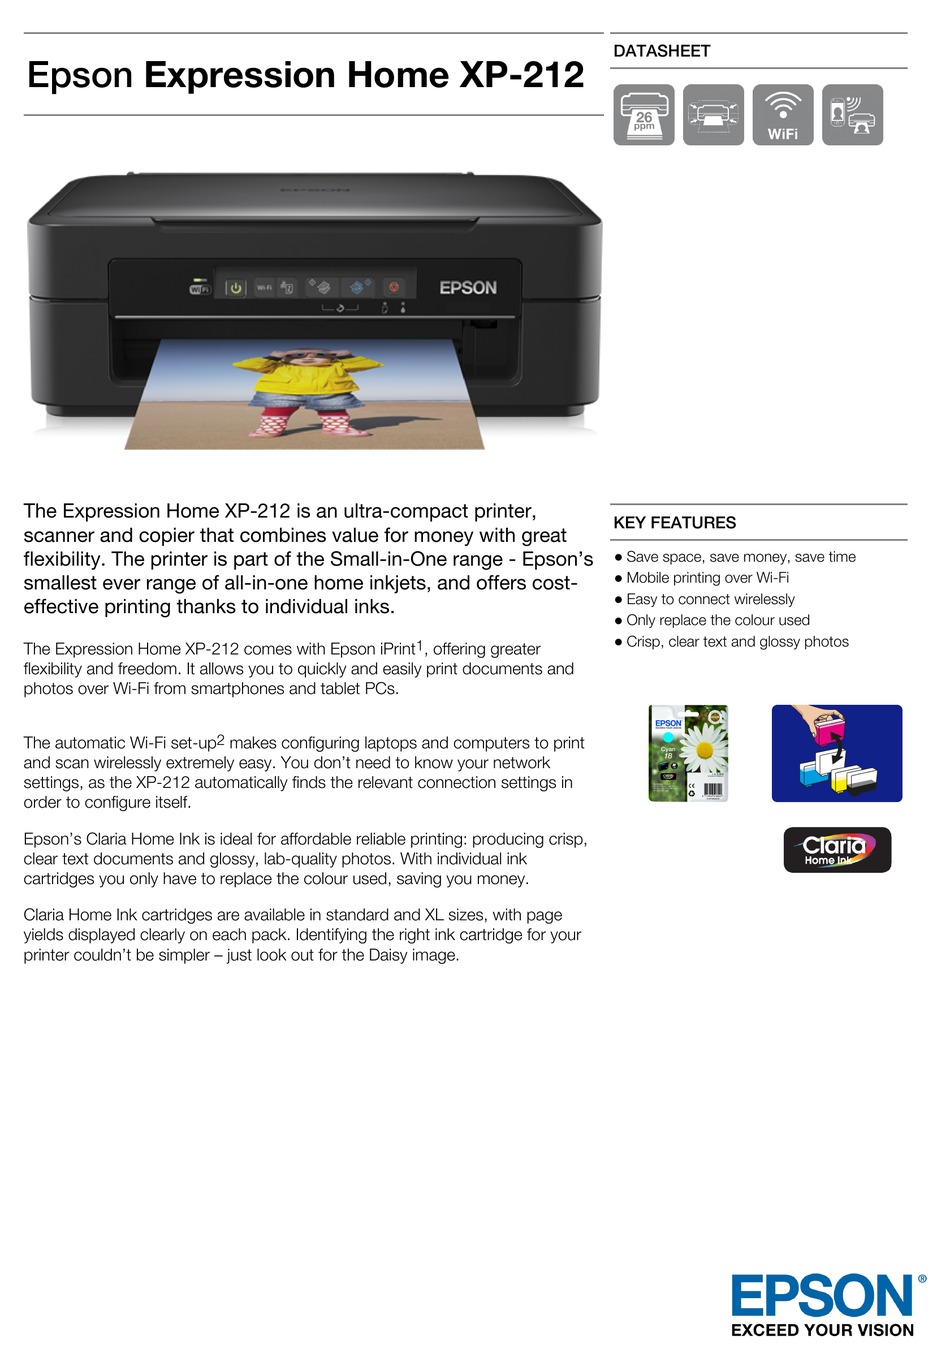 User manual Epson Expression Home XP-2200 (English - 172 pages)